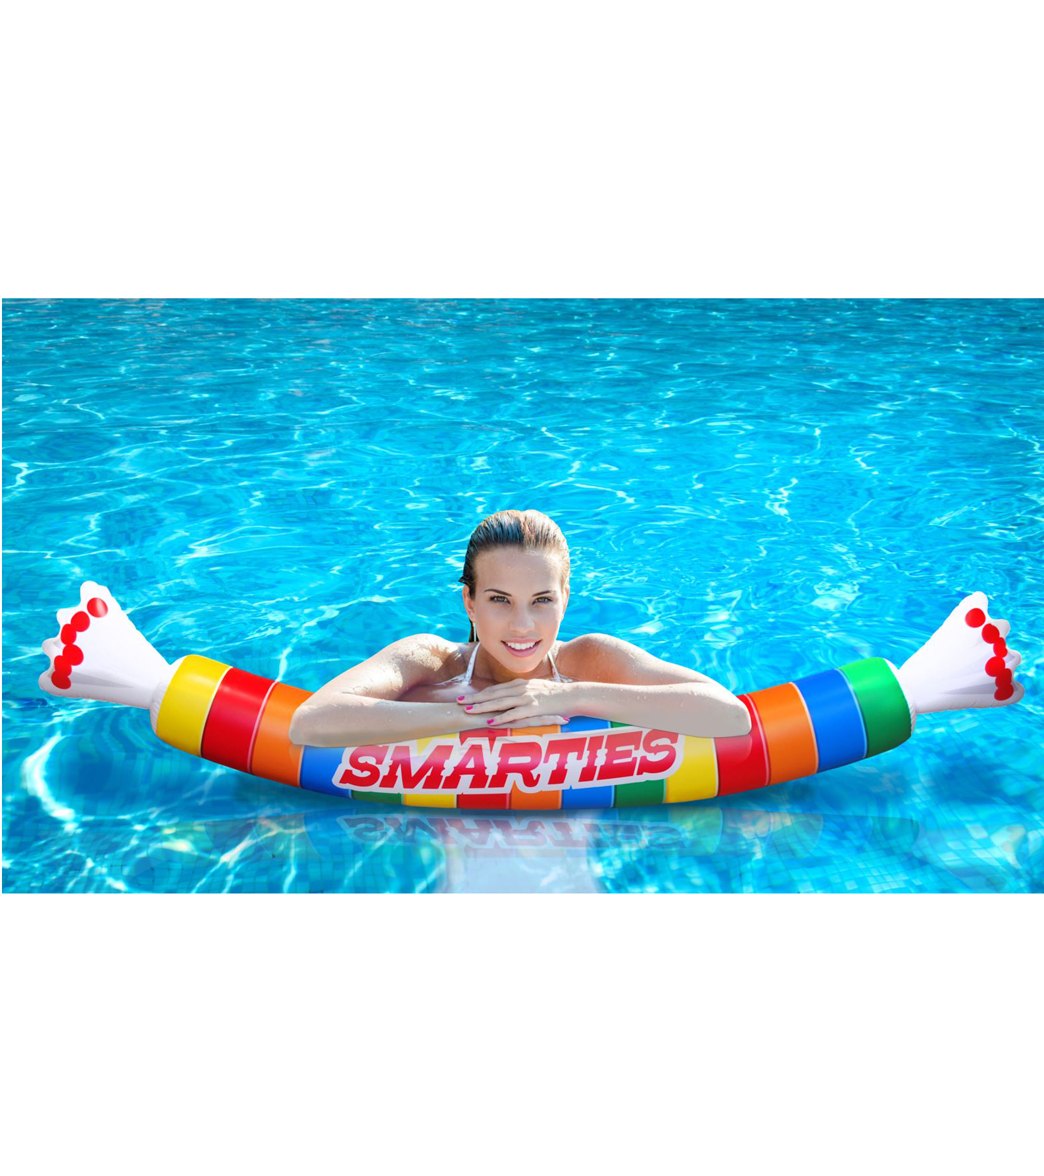 Big Mouth Toys Smarties Inflatable Pool Noodle At